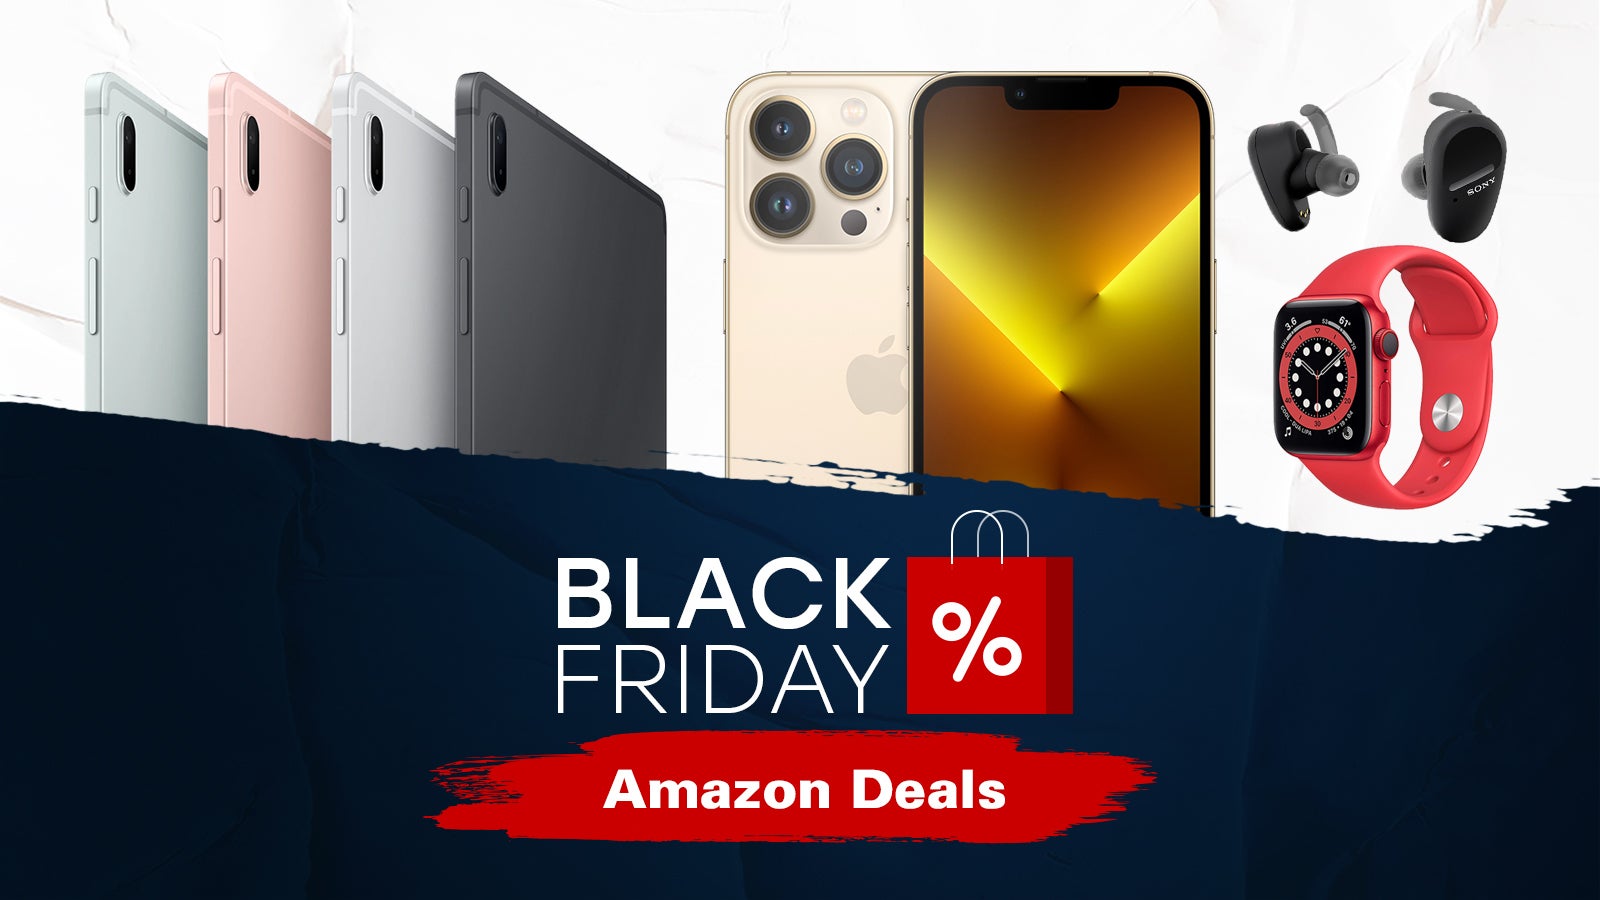 Amazon Black Friday deals 2021: what to expect - PhoneArena